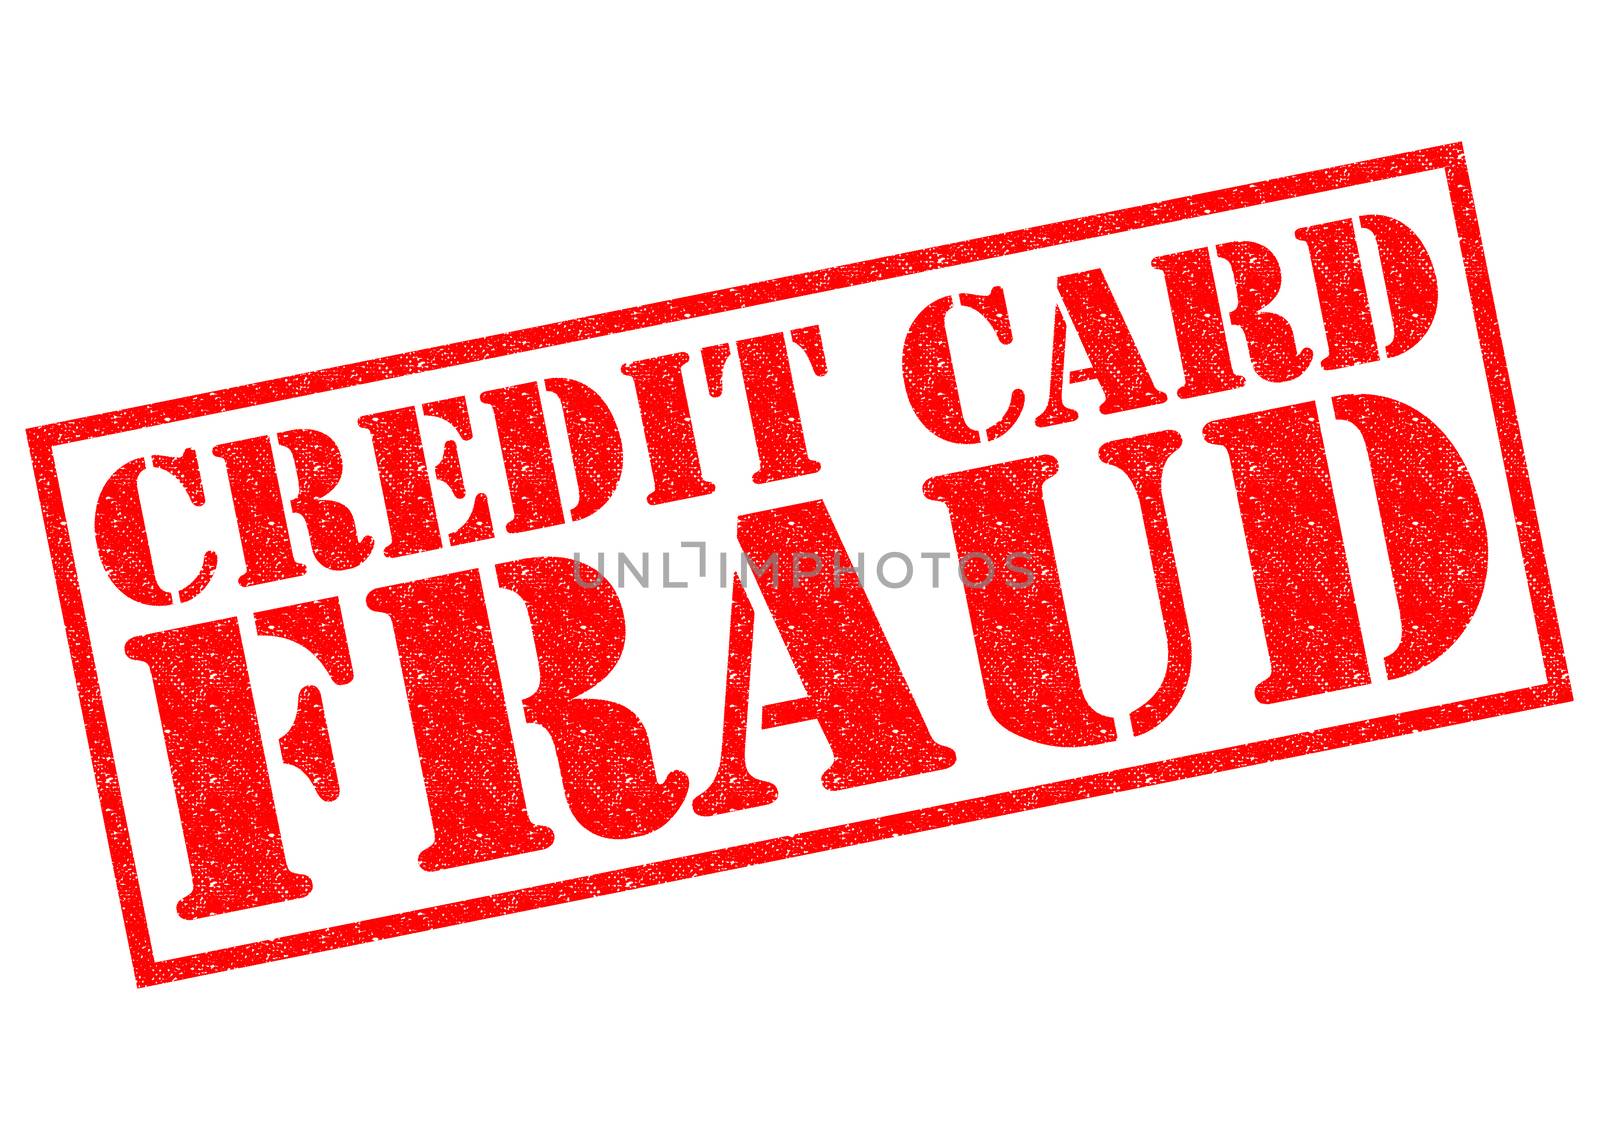 CREDIT CARD FRAUD red Rubber Stamp over a white background.